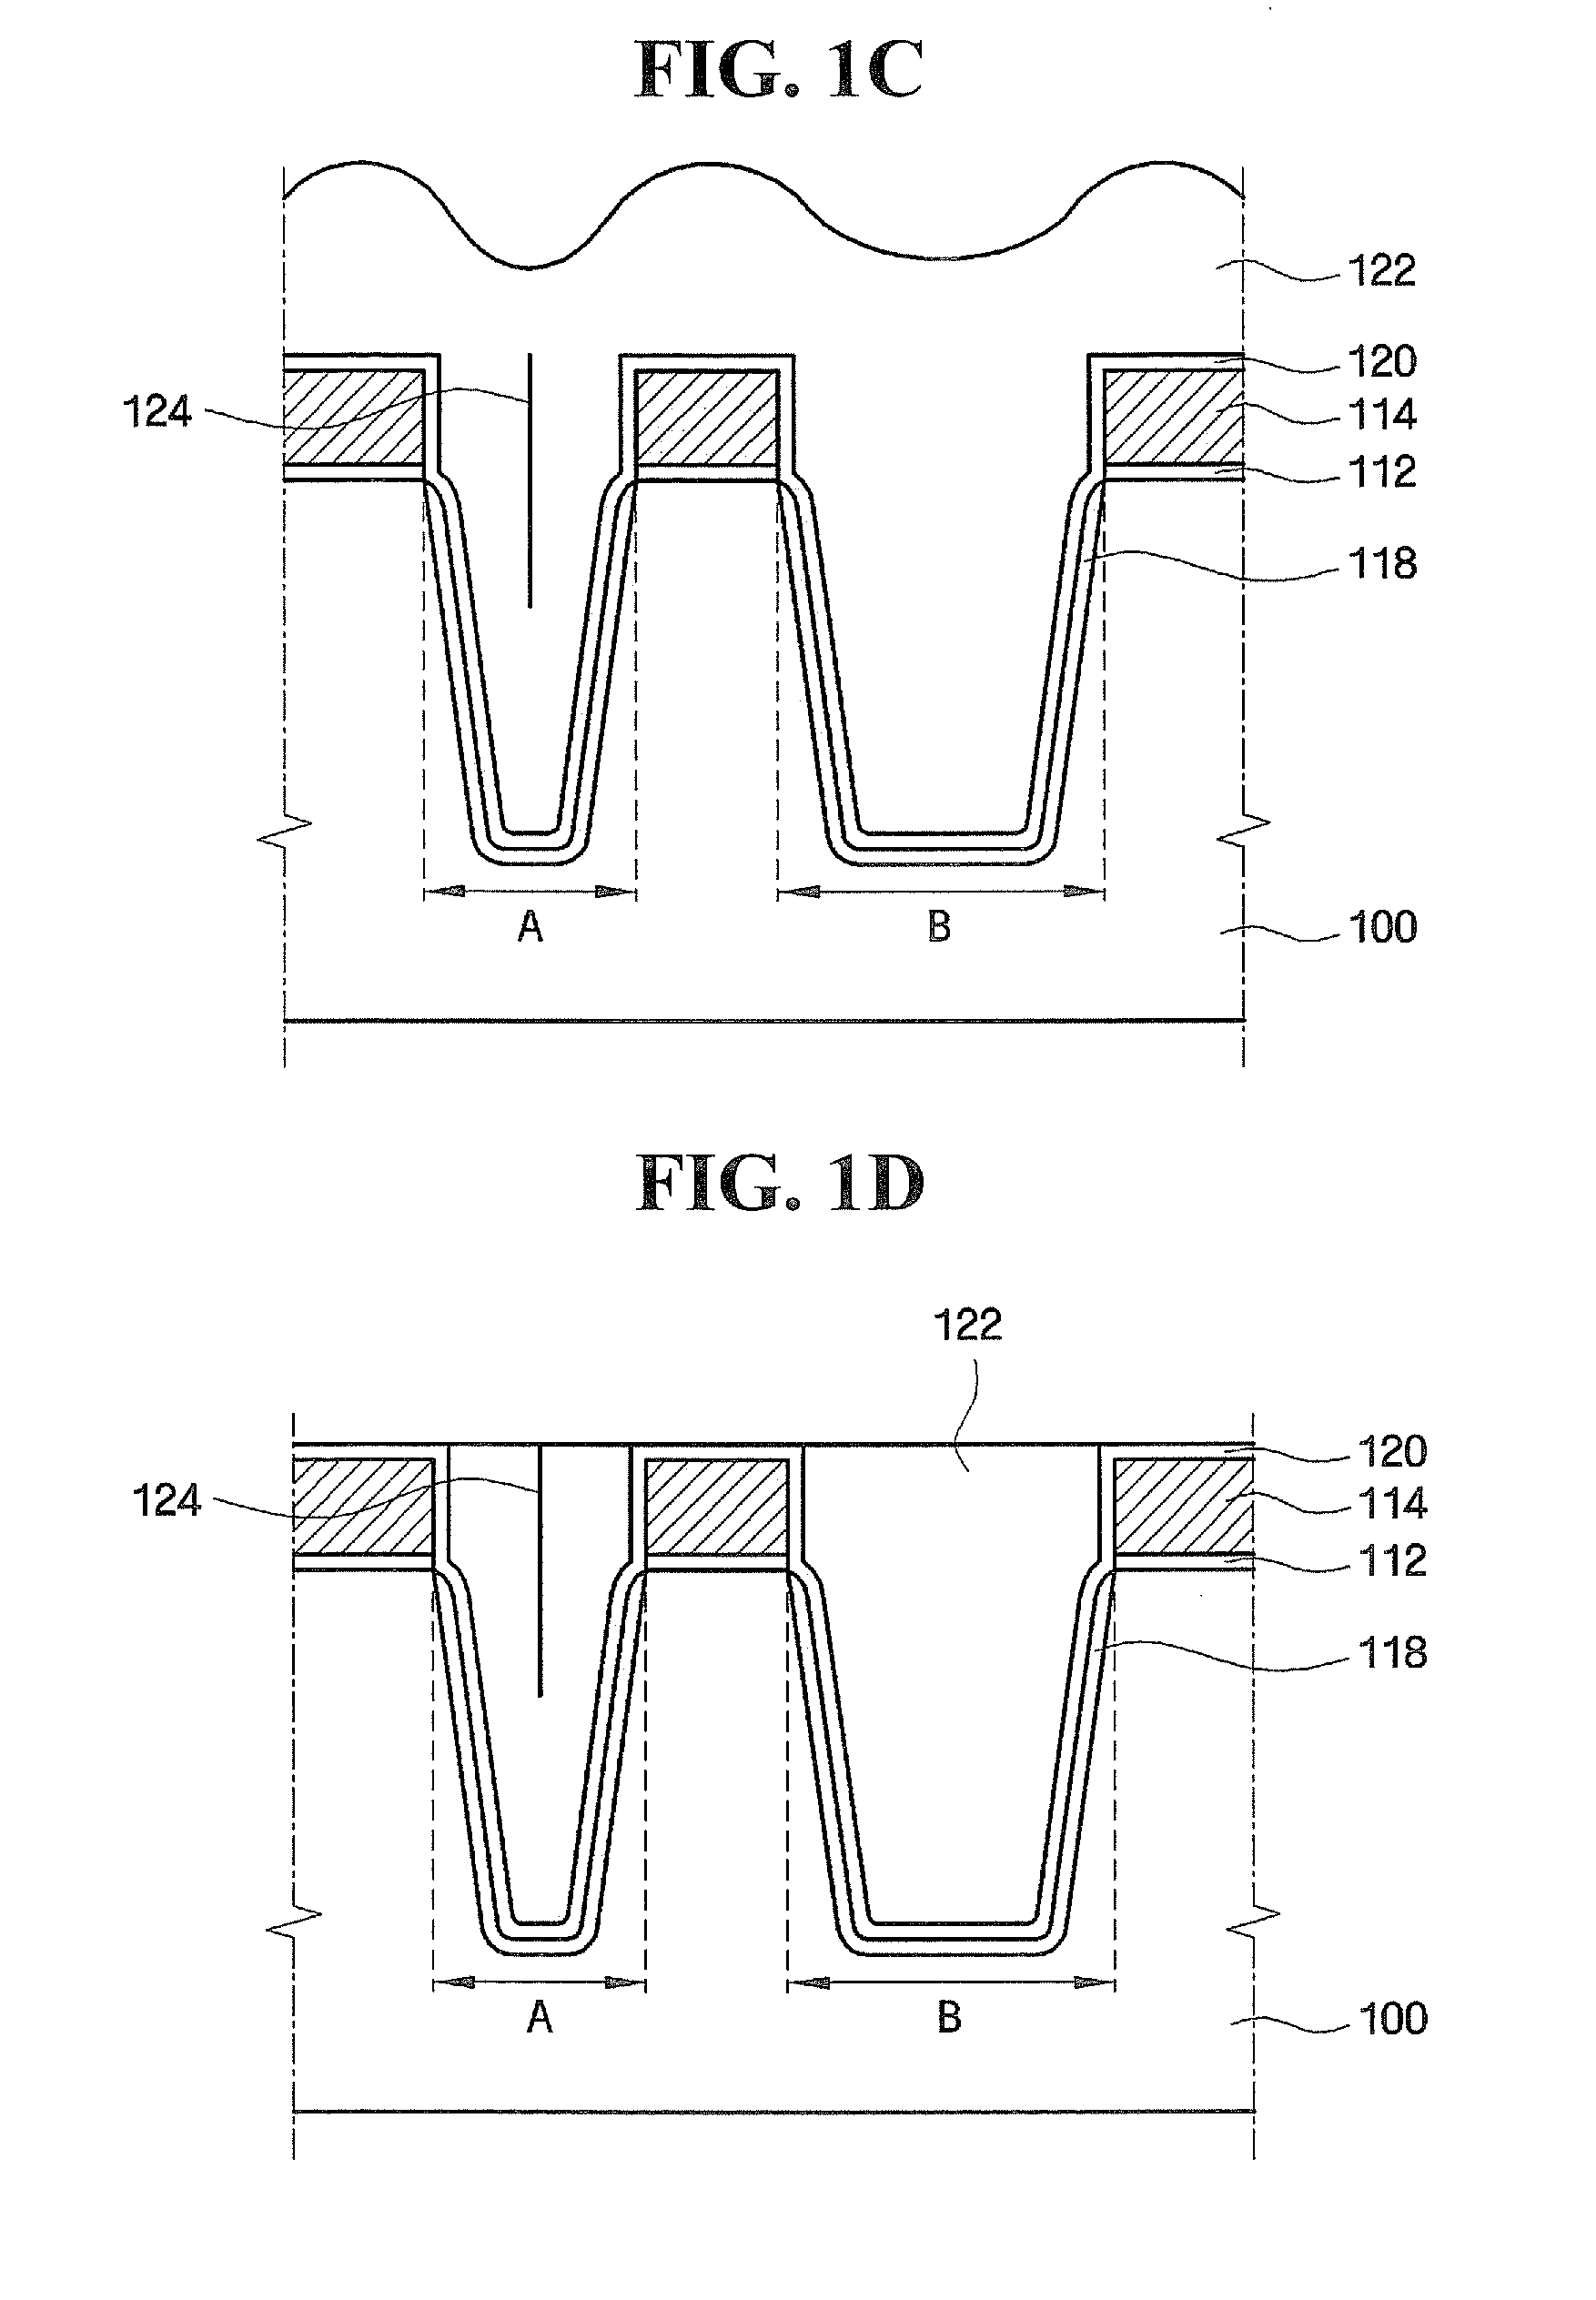 Methods of Forming Integrated Circuit Devices Having Ion-Cured Electrically Insulating Layers Therein